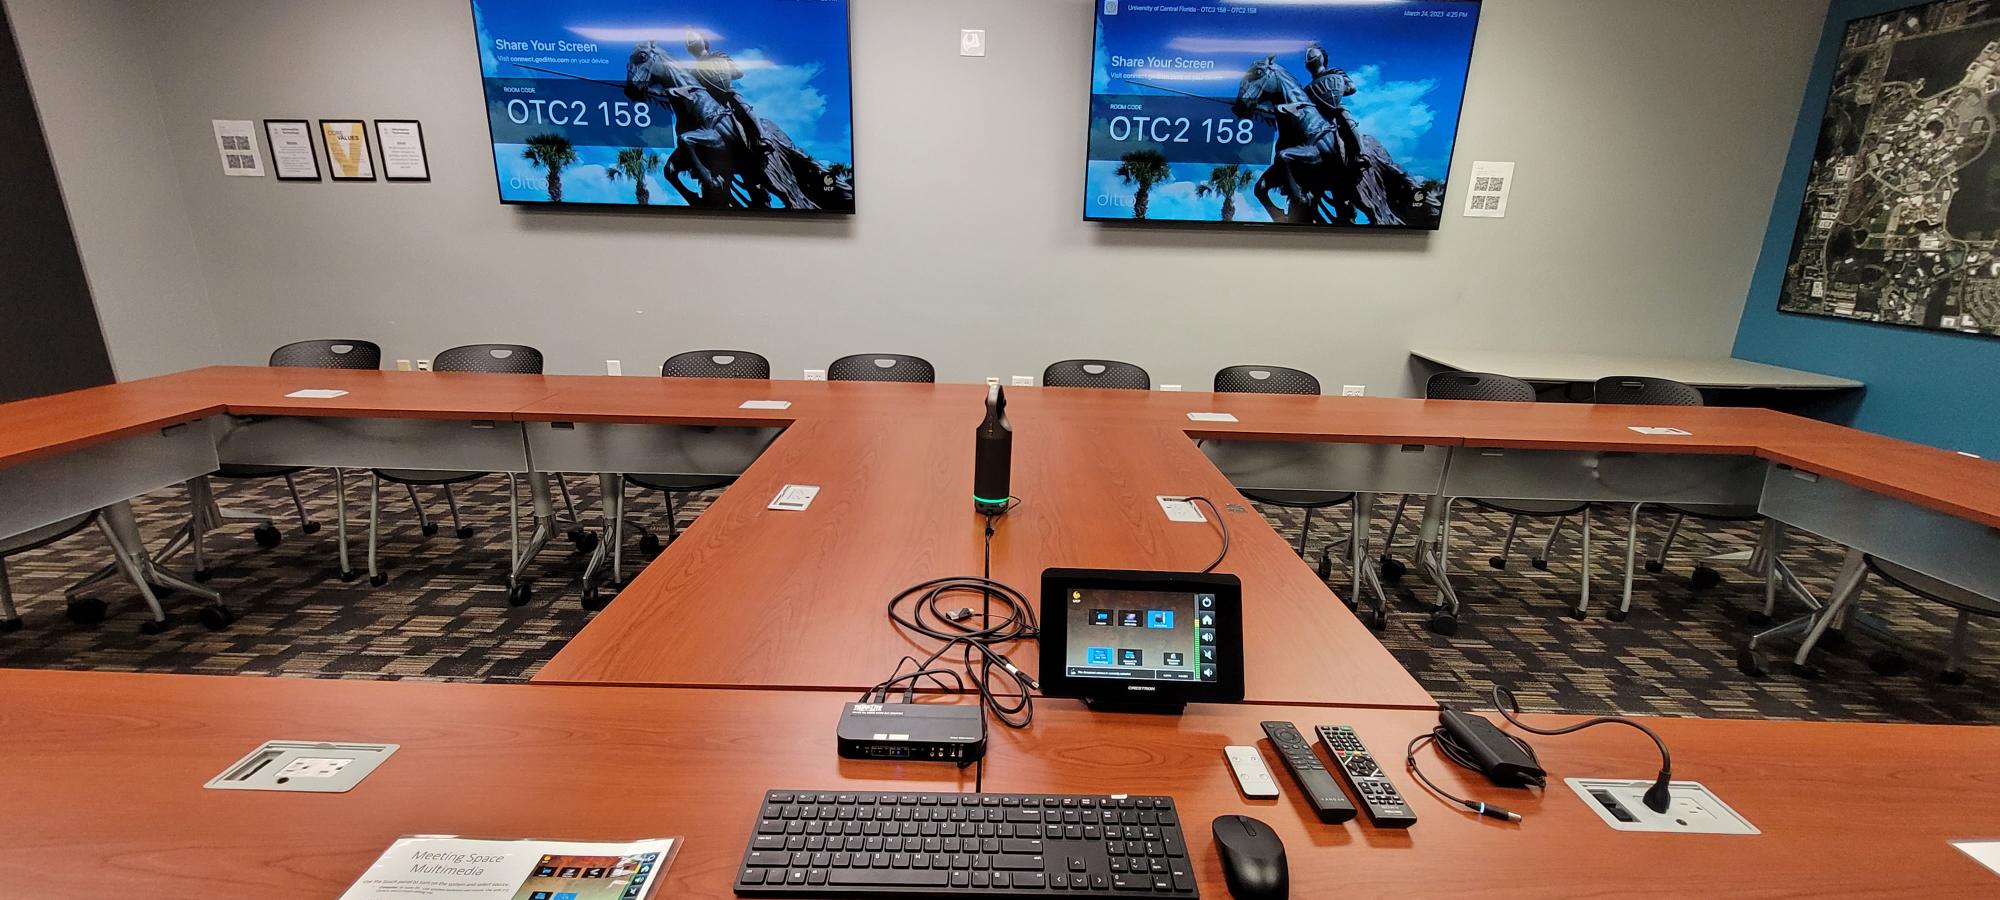 Case Study: Adapting to Remote Learning with Kandao Meeting Pro at the University of Central Florida 